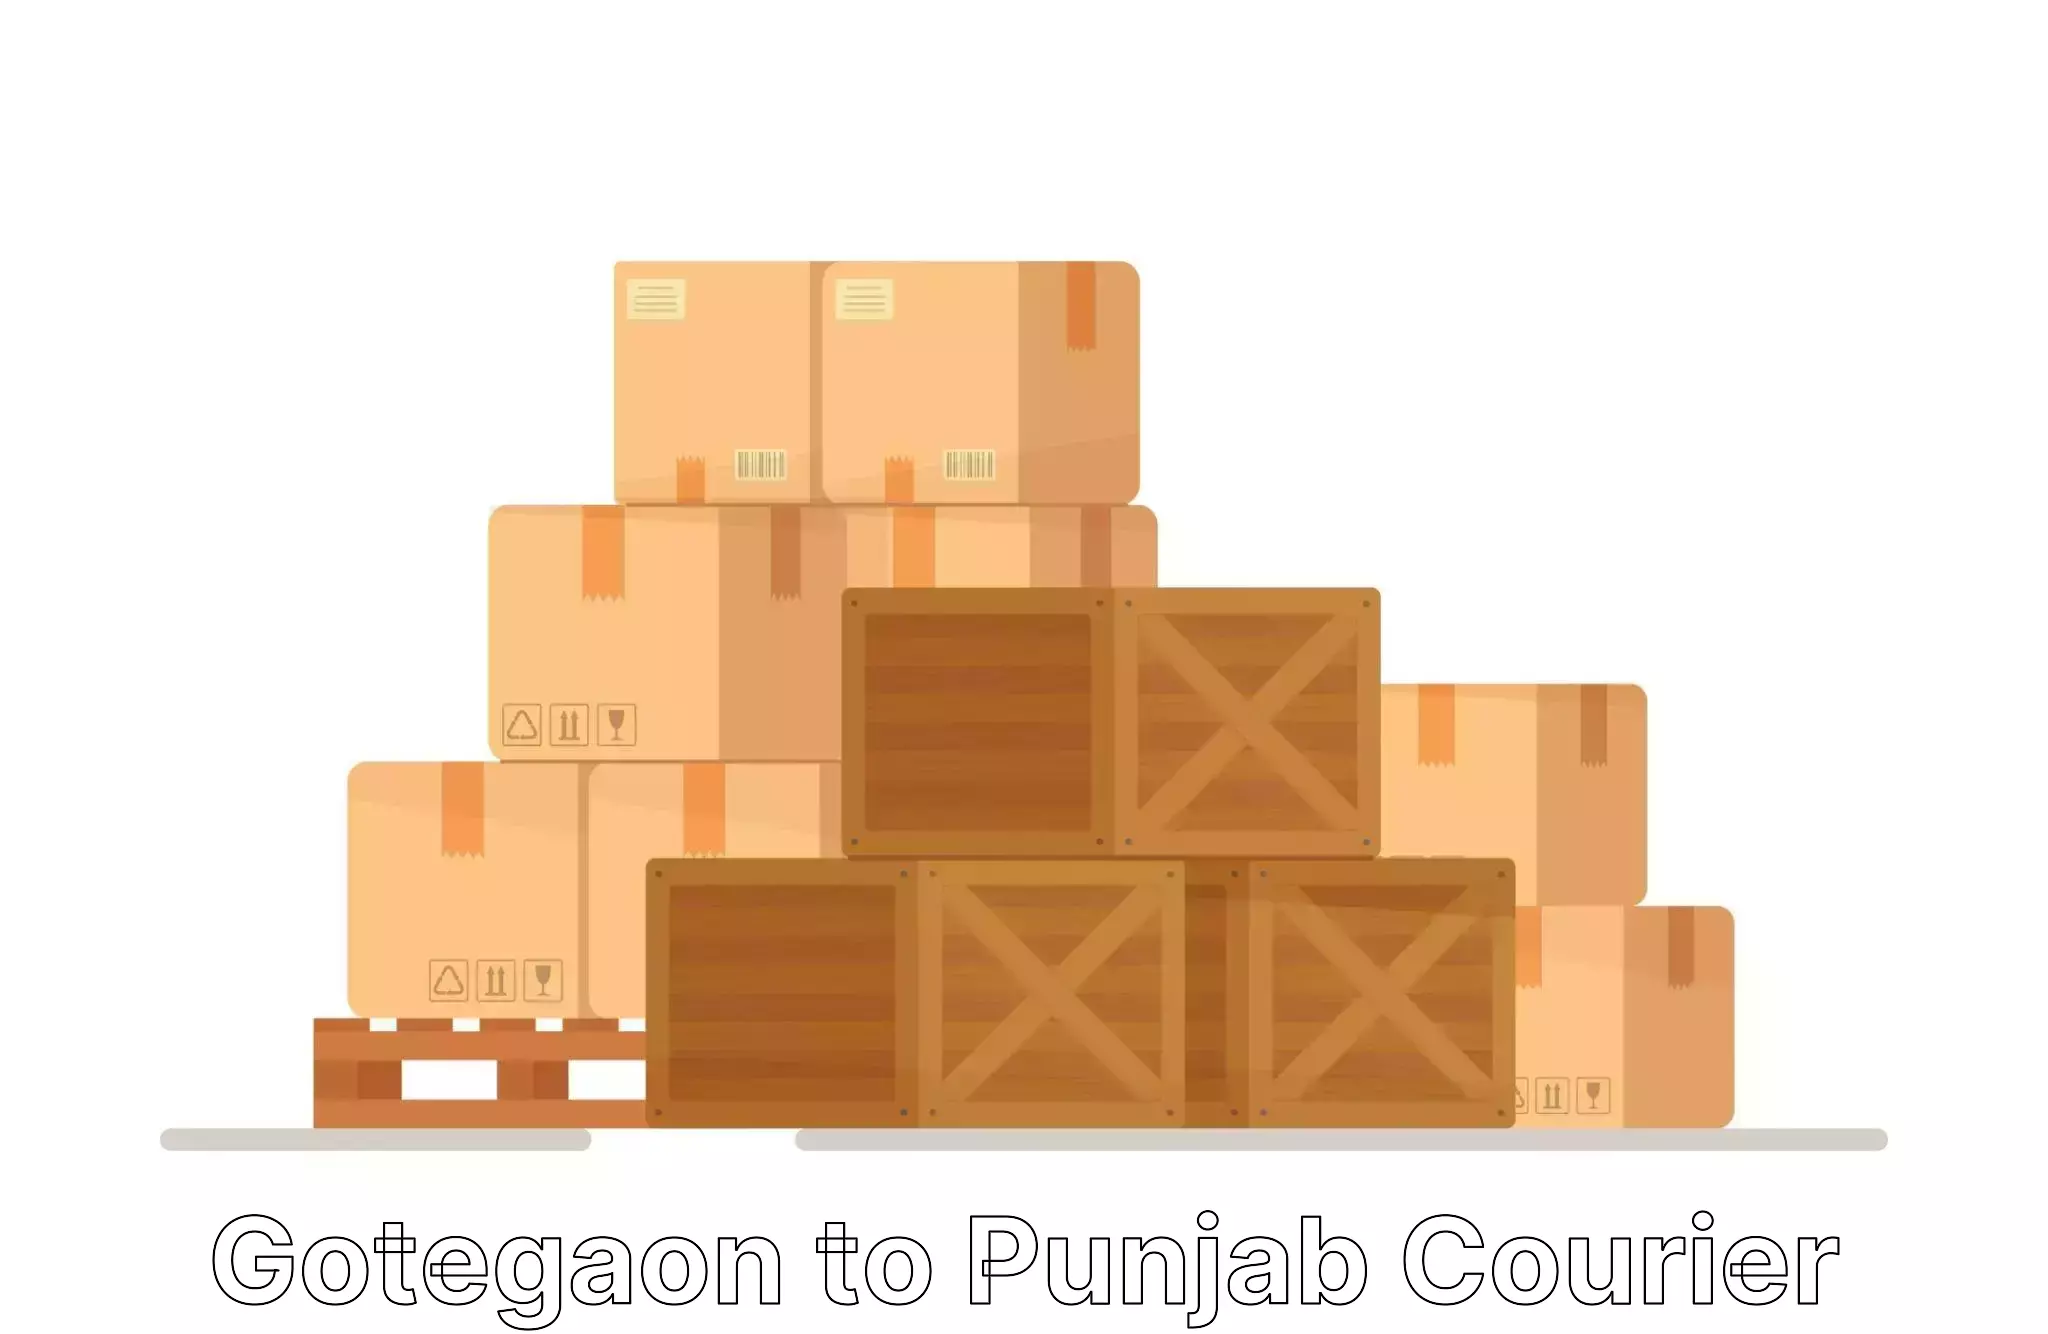 Custom relocation solutions in Gotegaon to Punjab